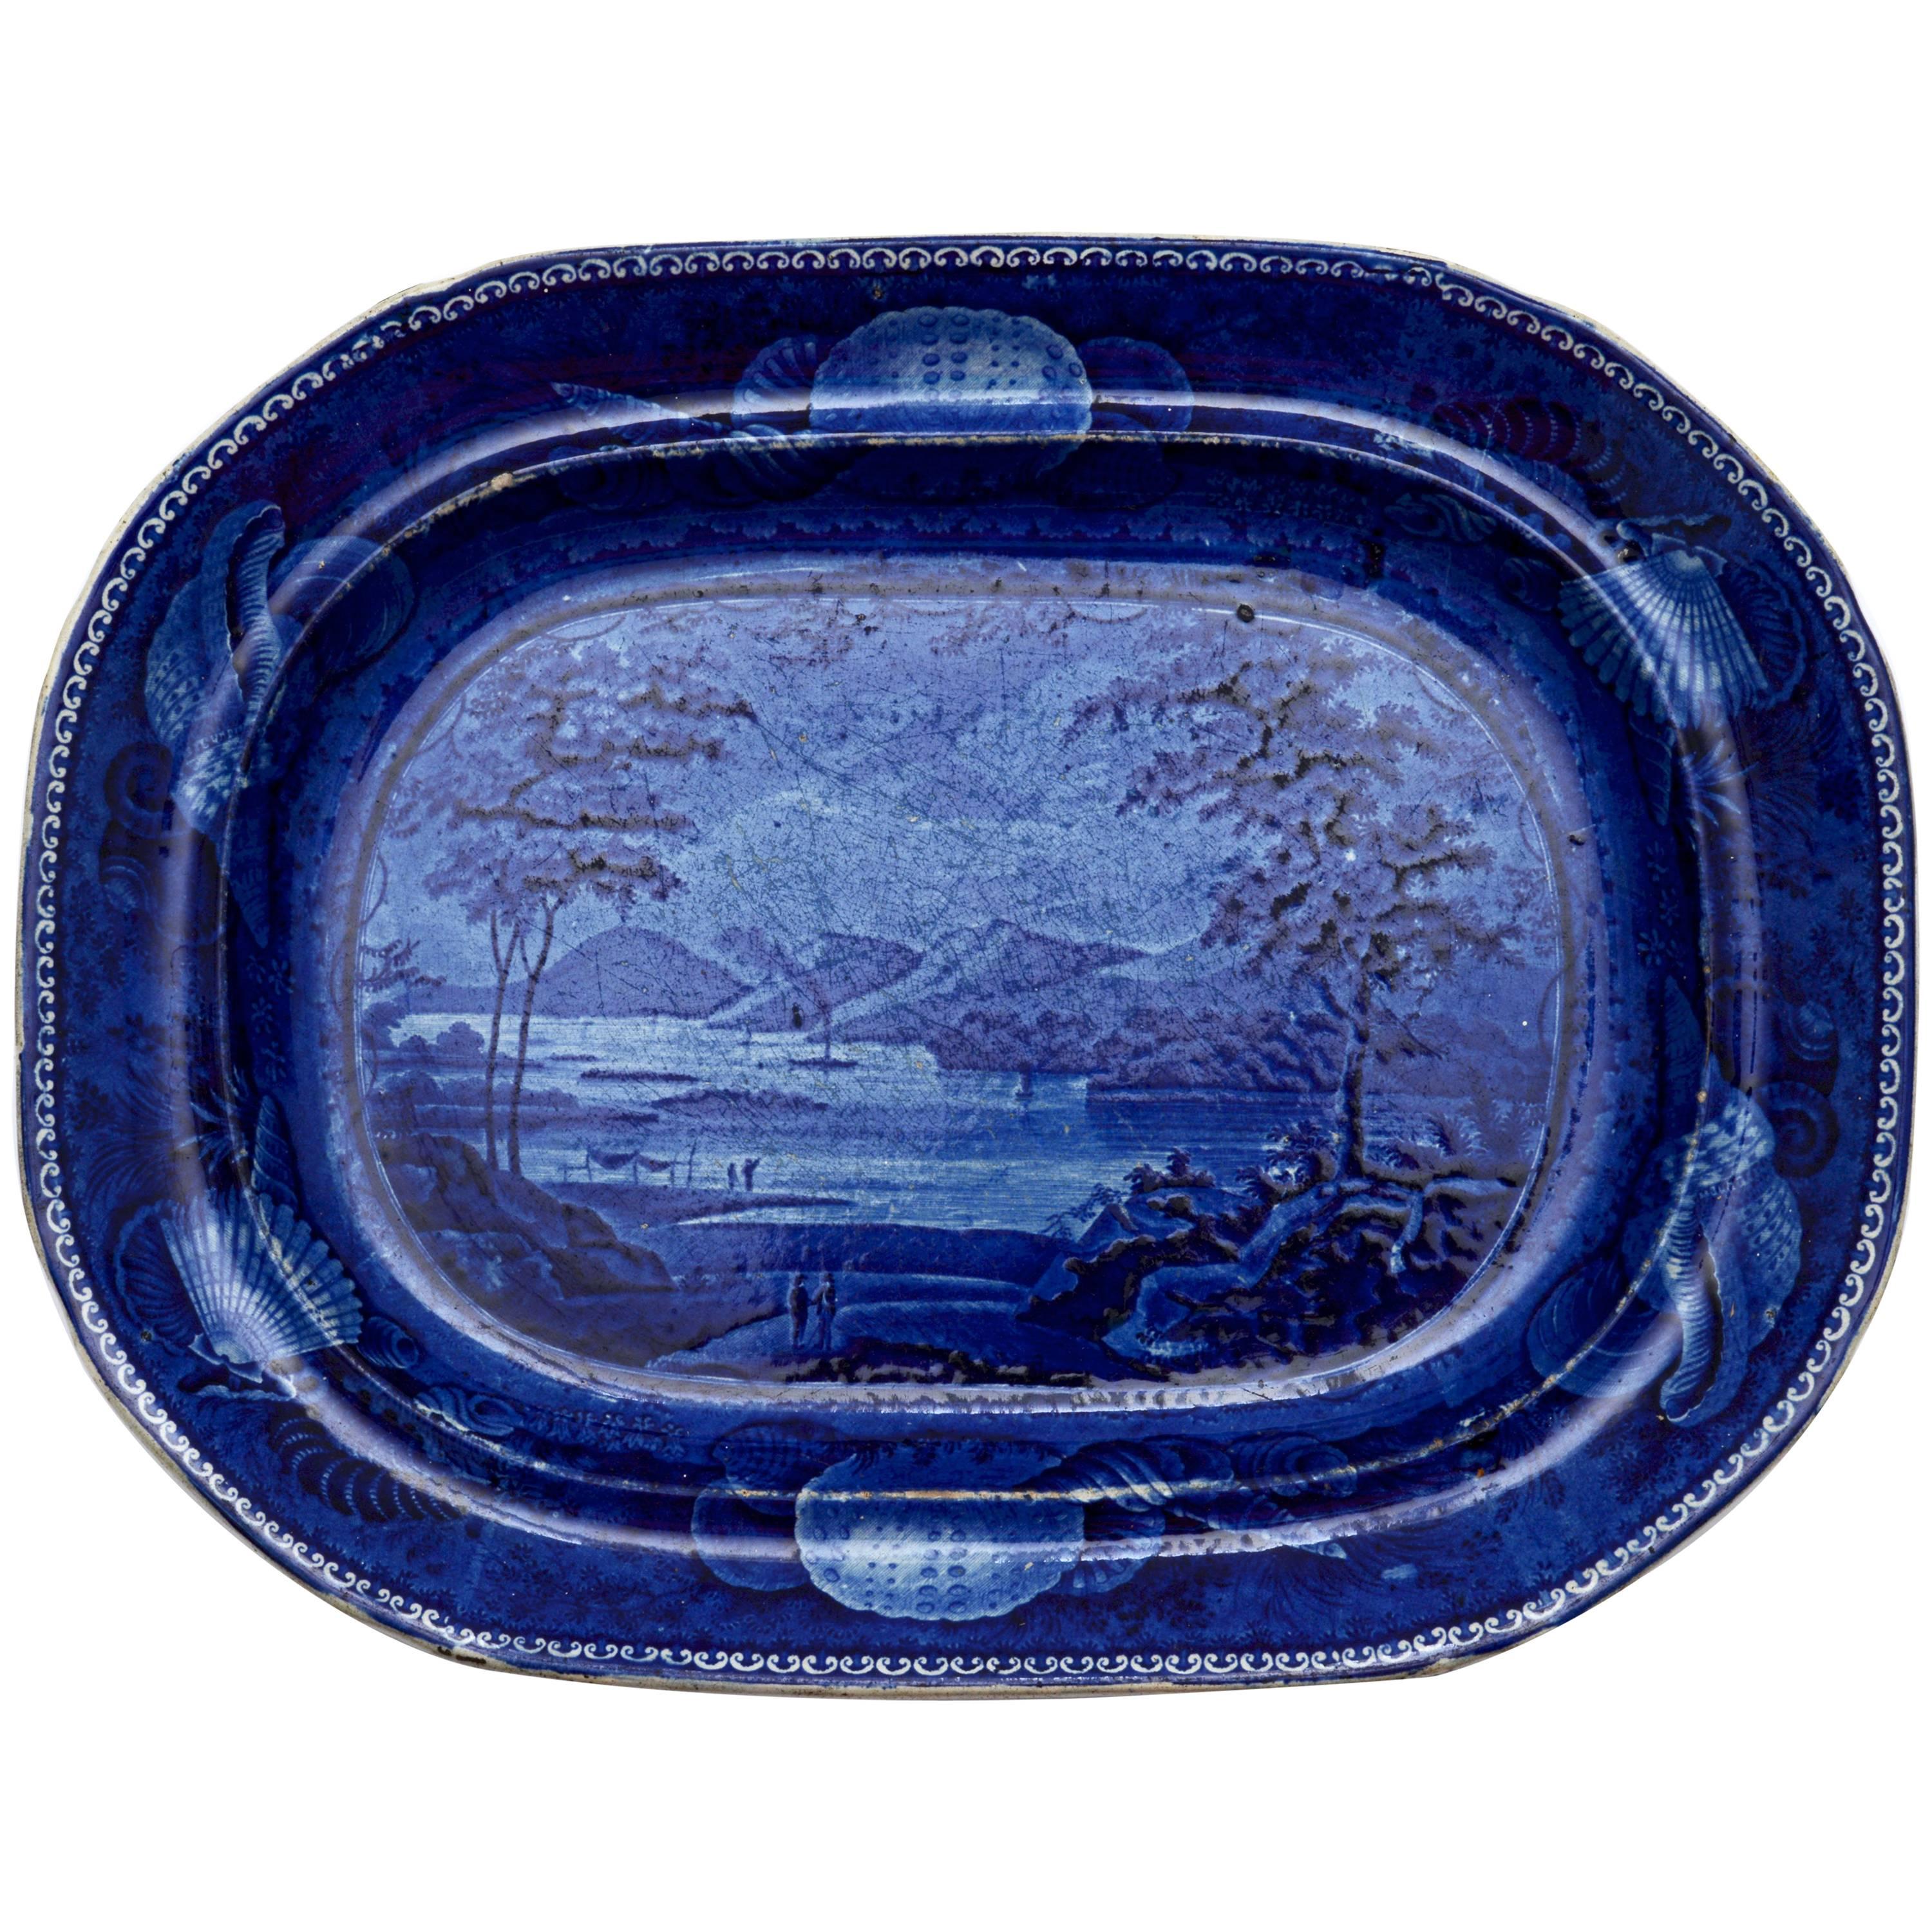 Lake George, State of New York Staffordshire Platter by Enoch Wood & Sons For Sale